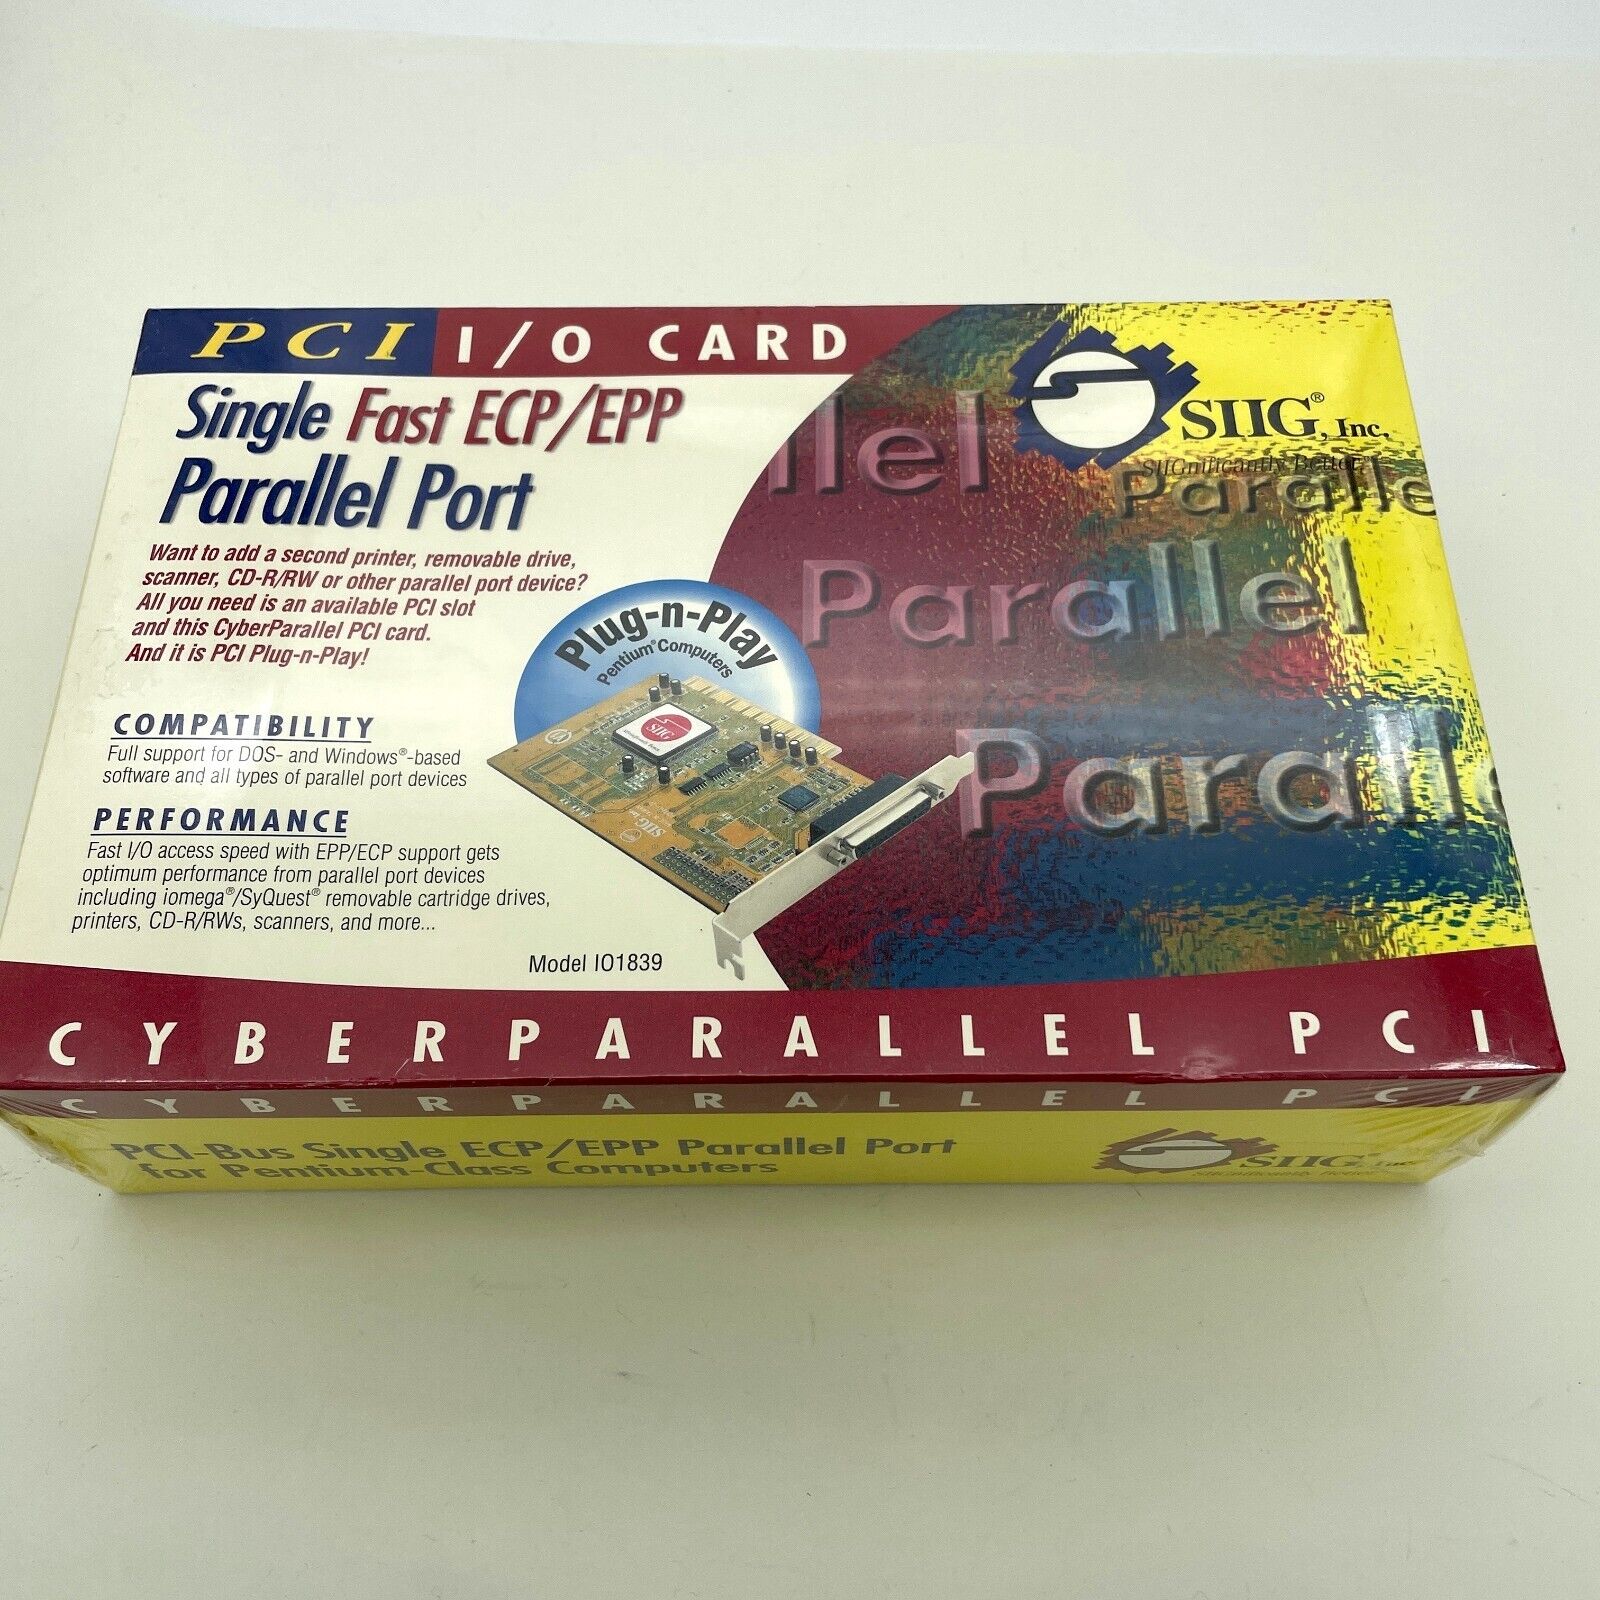 NEW SIIG IO1839 PCI CYBERPARALLEL I/O Card ECP/EPP Parallel Printer - JJ-P00112